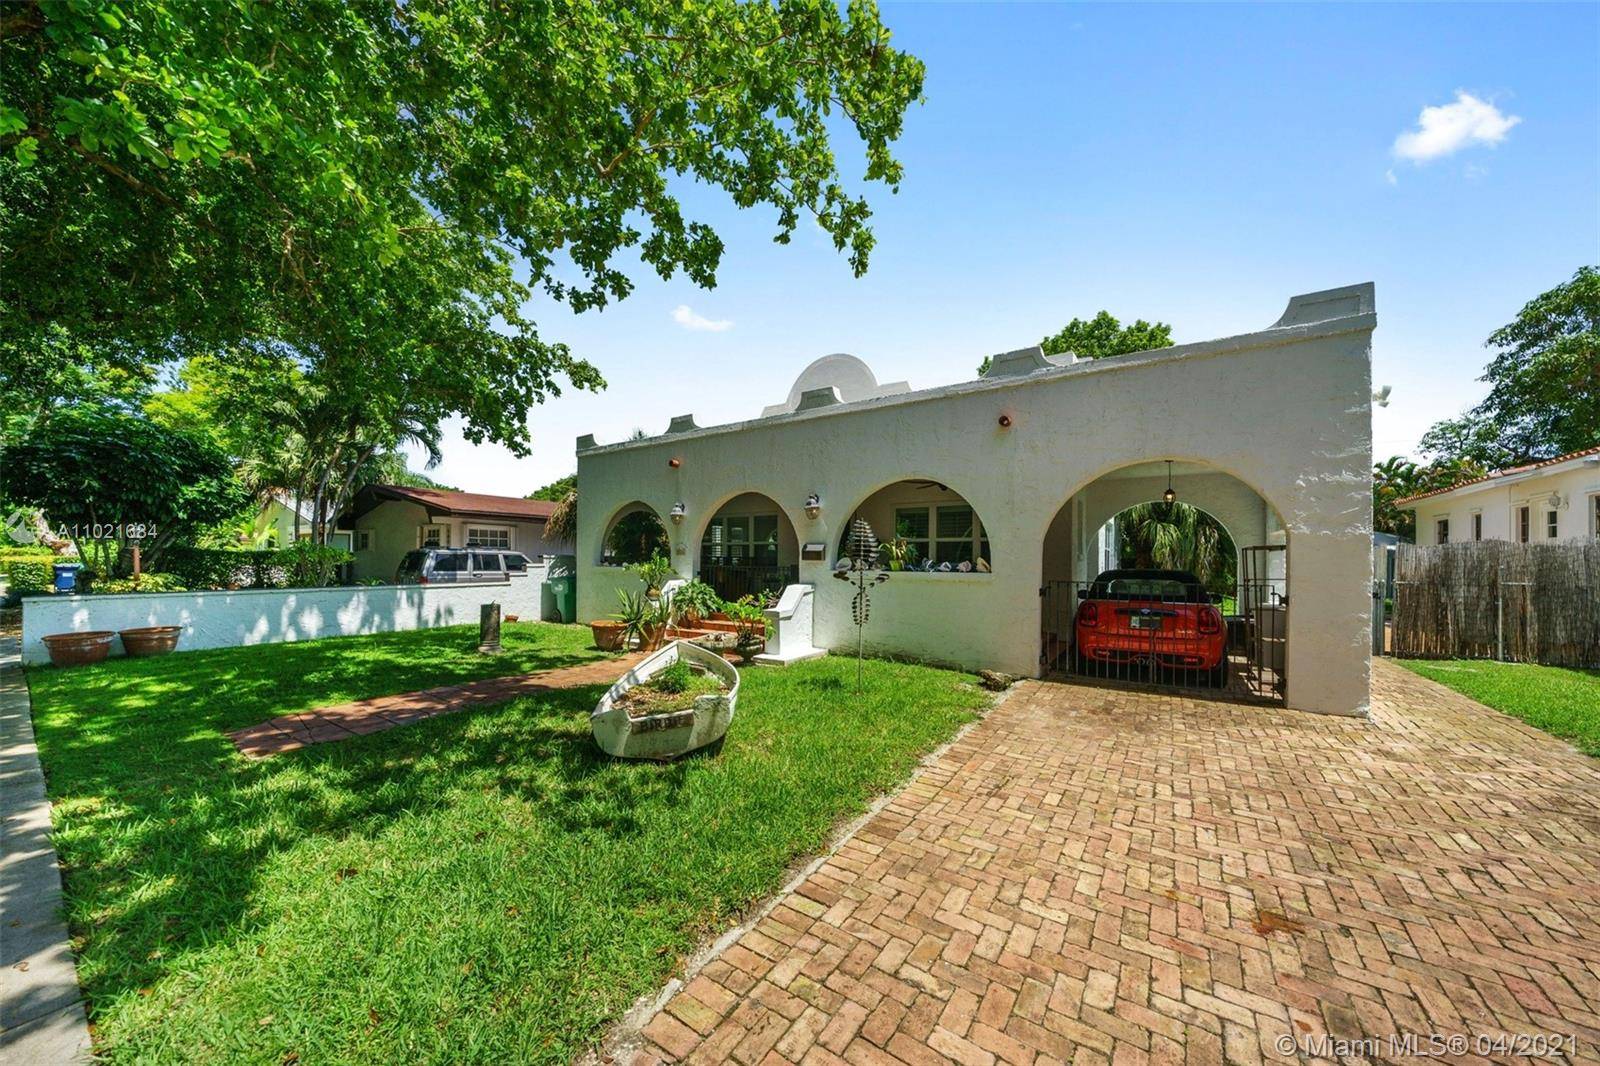 Charming bungalow on a tree lined street, just minutes to world class shopping, dining and entertainment in Coral Gables Coconut Grove.